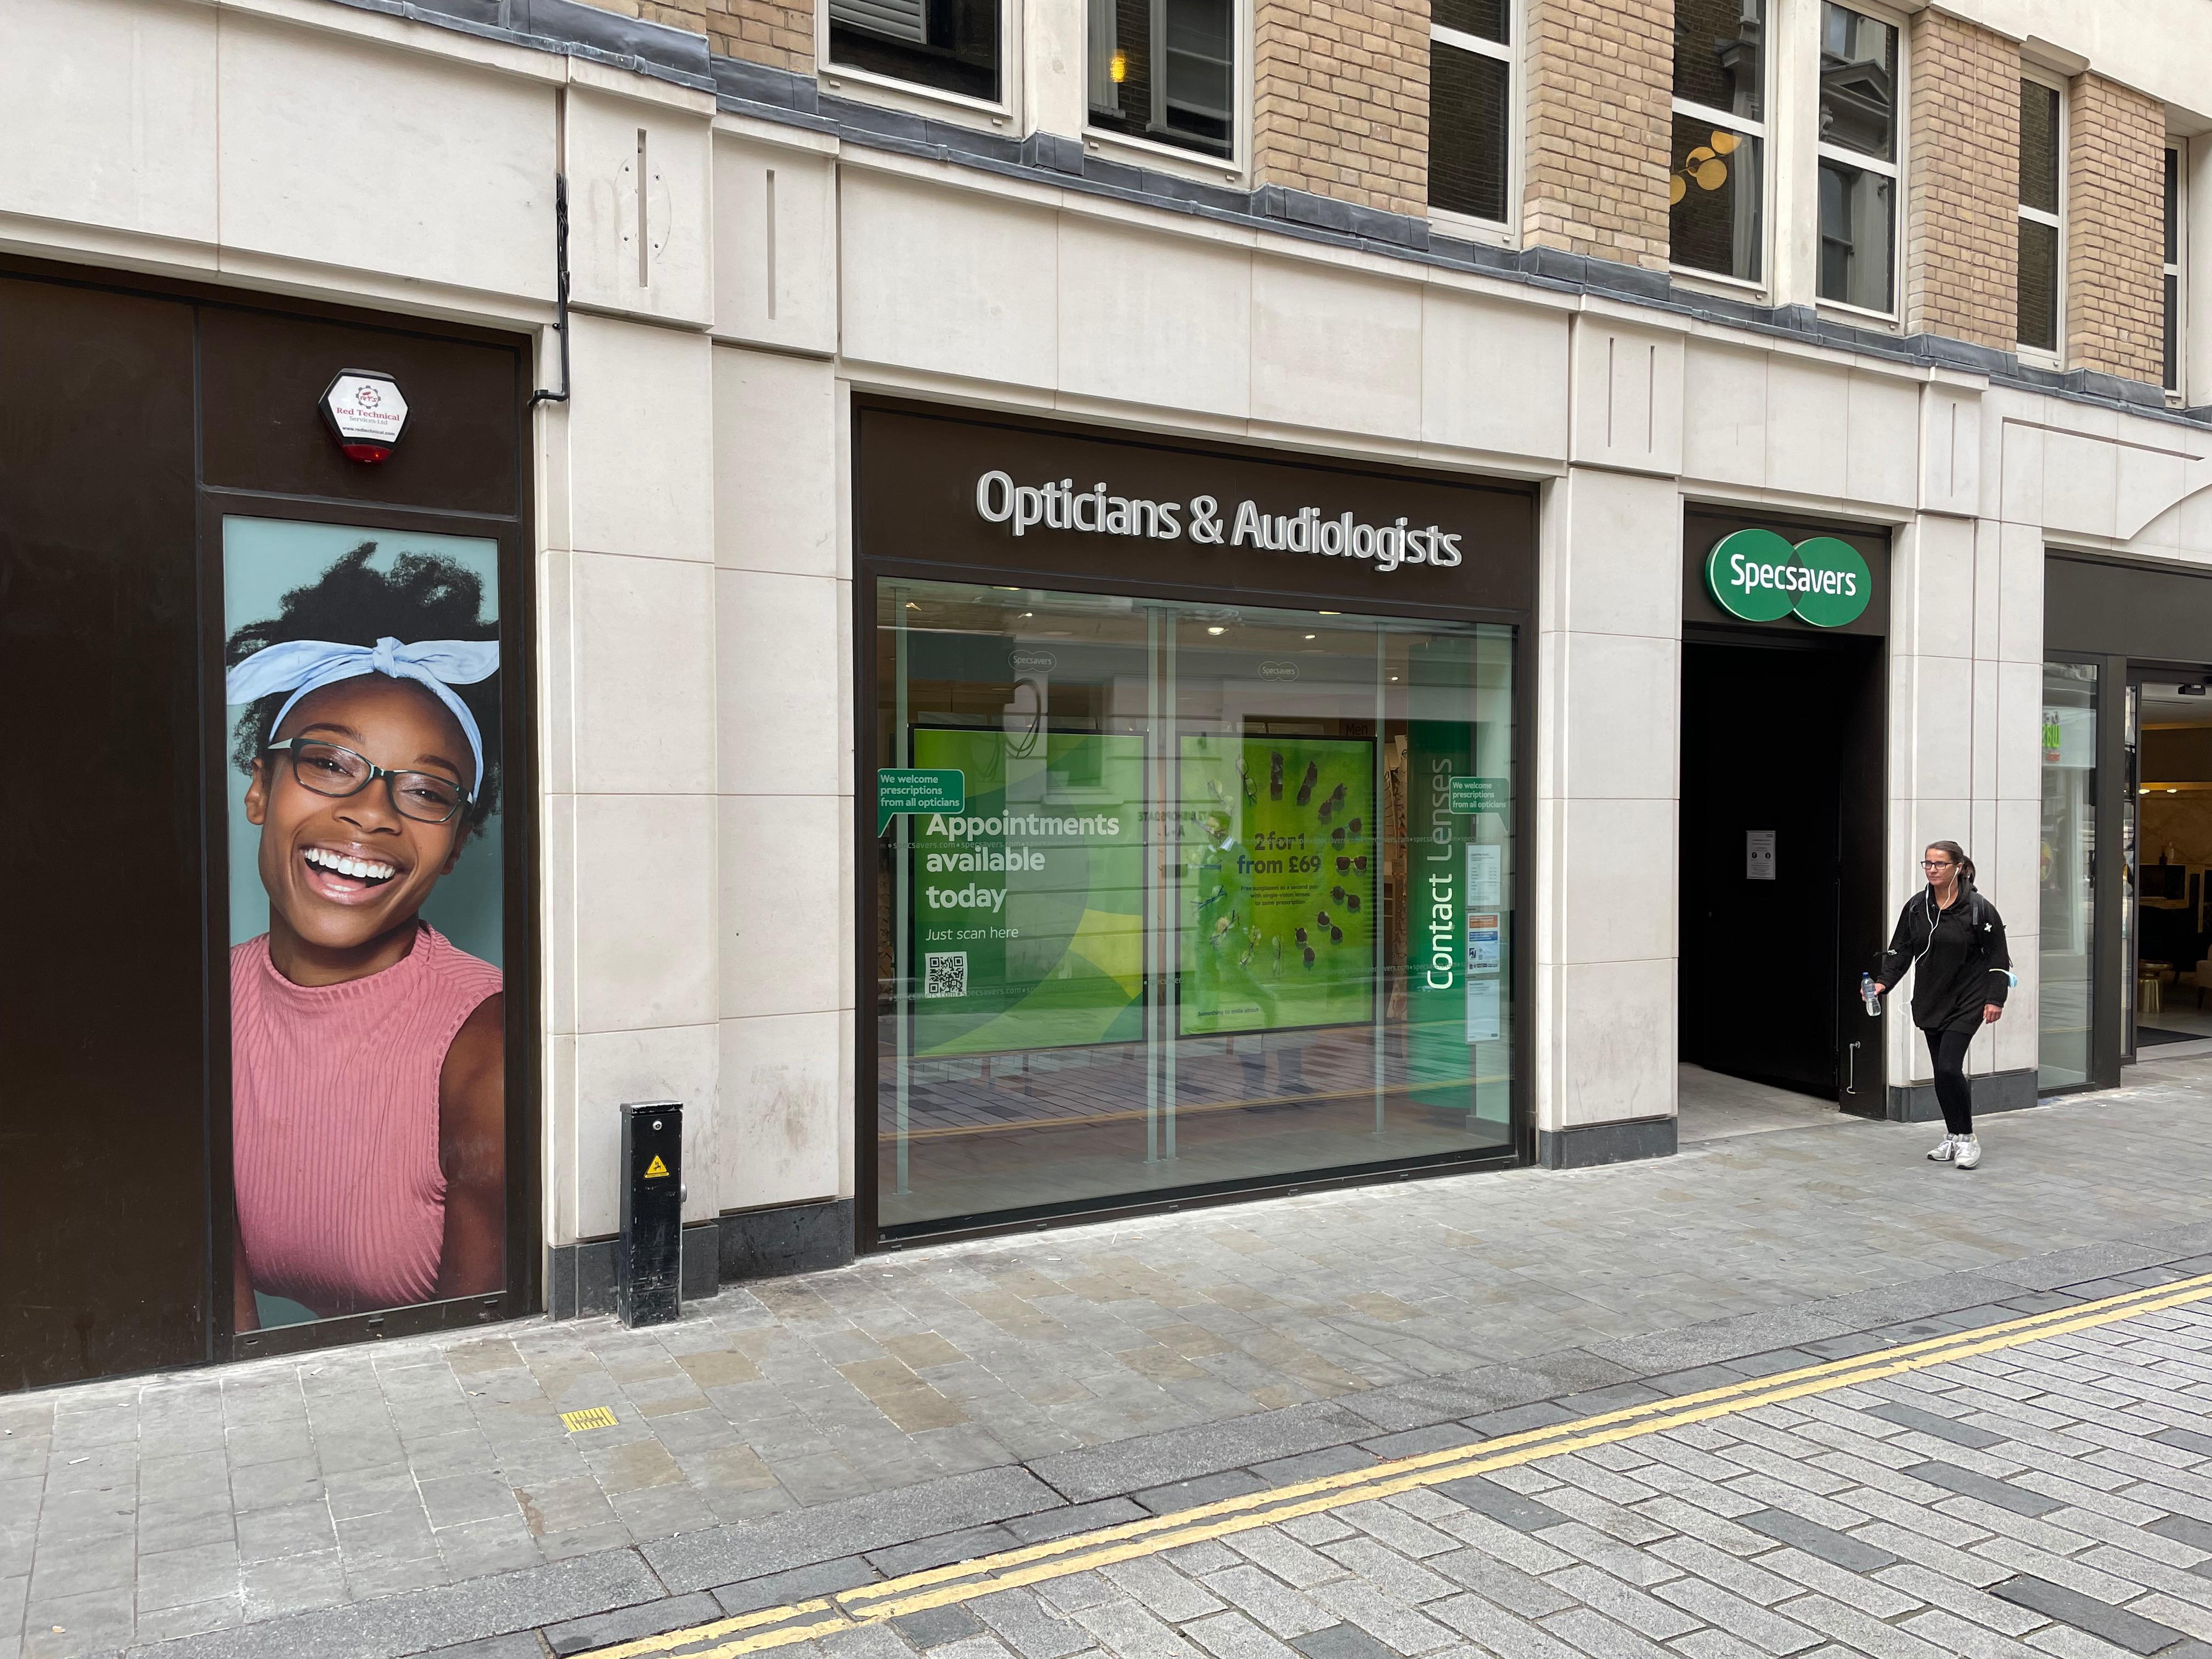 Images Specsavers Opticians and Audiologists - Liverpool Street